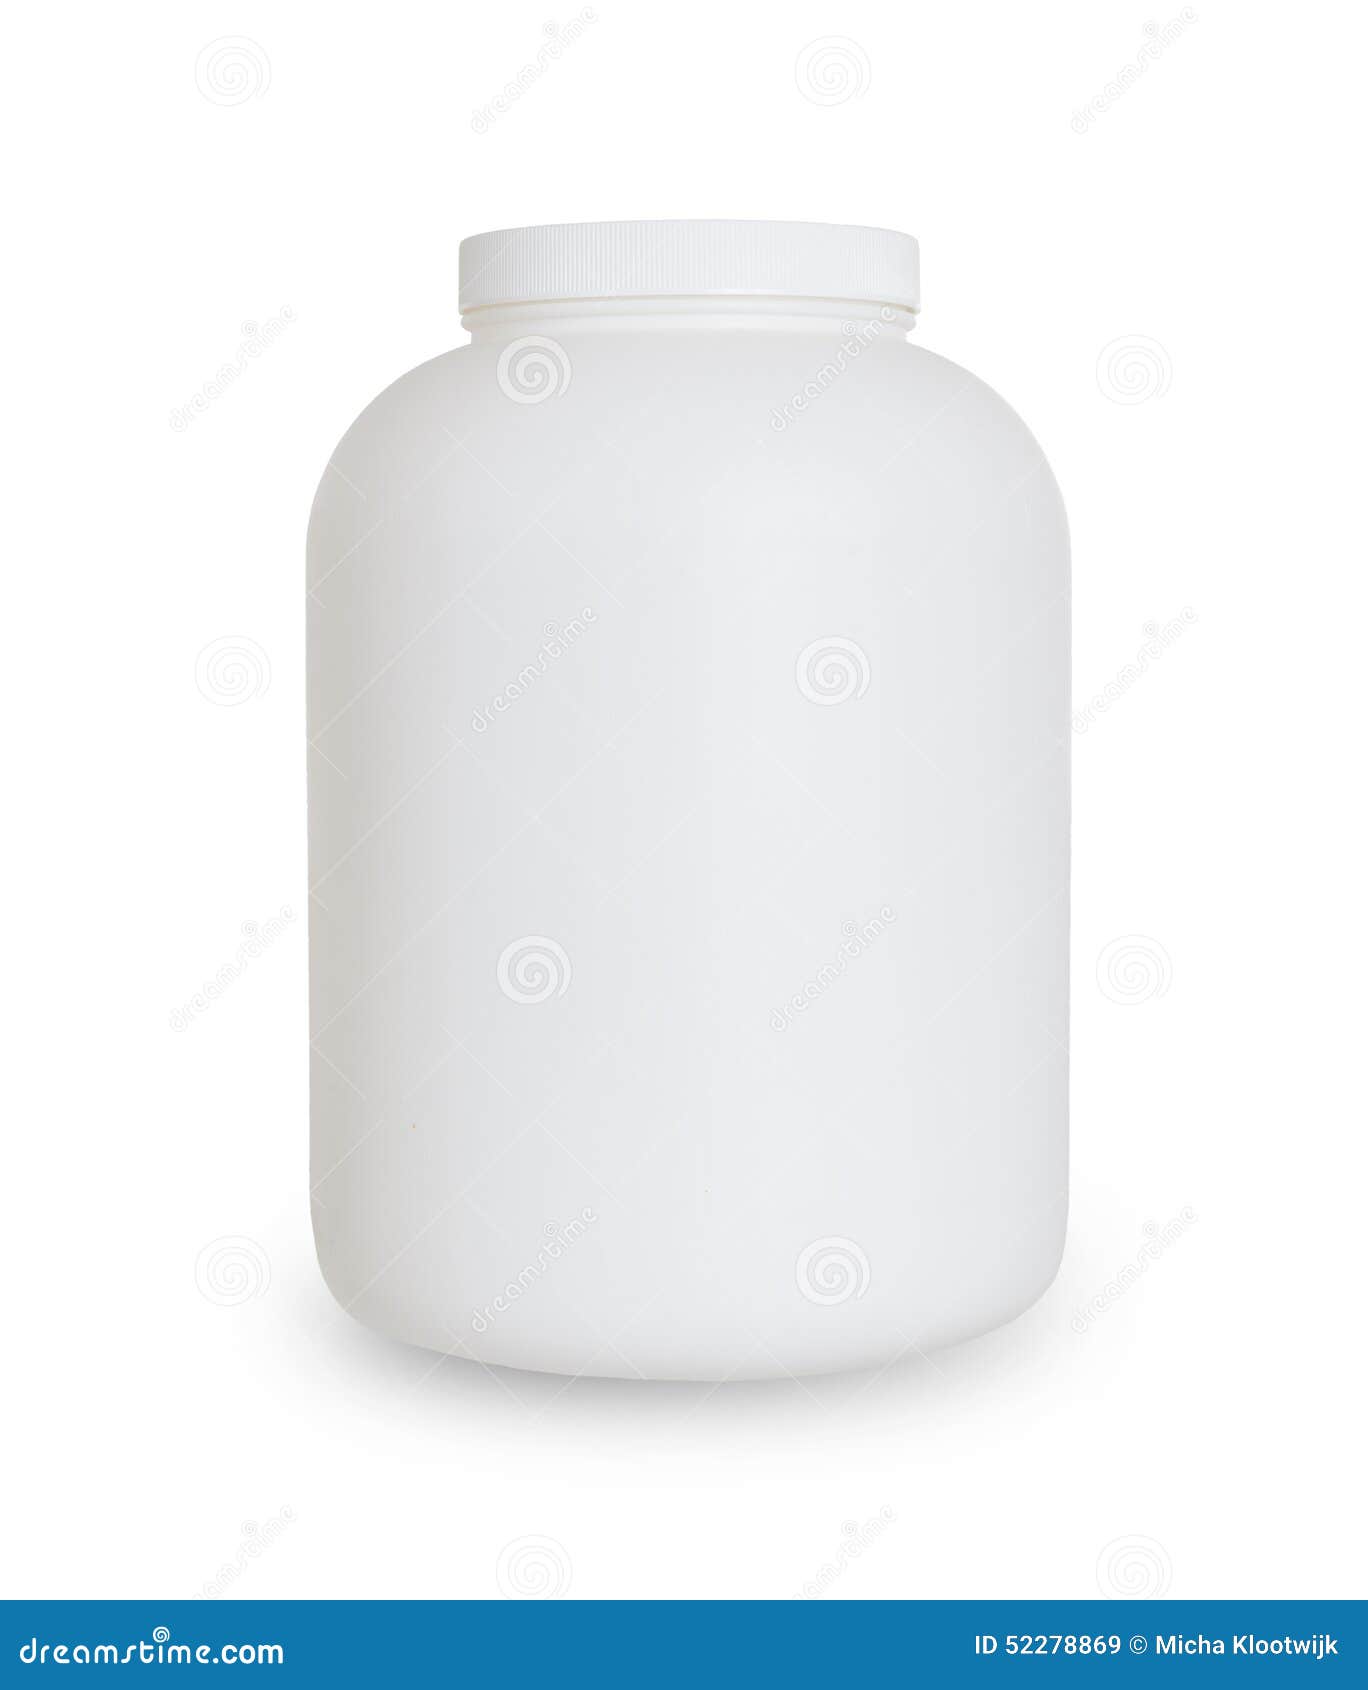 Empty Protein Powder Container Isolated On Stock Photo 266129924